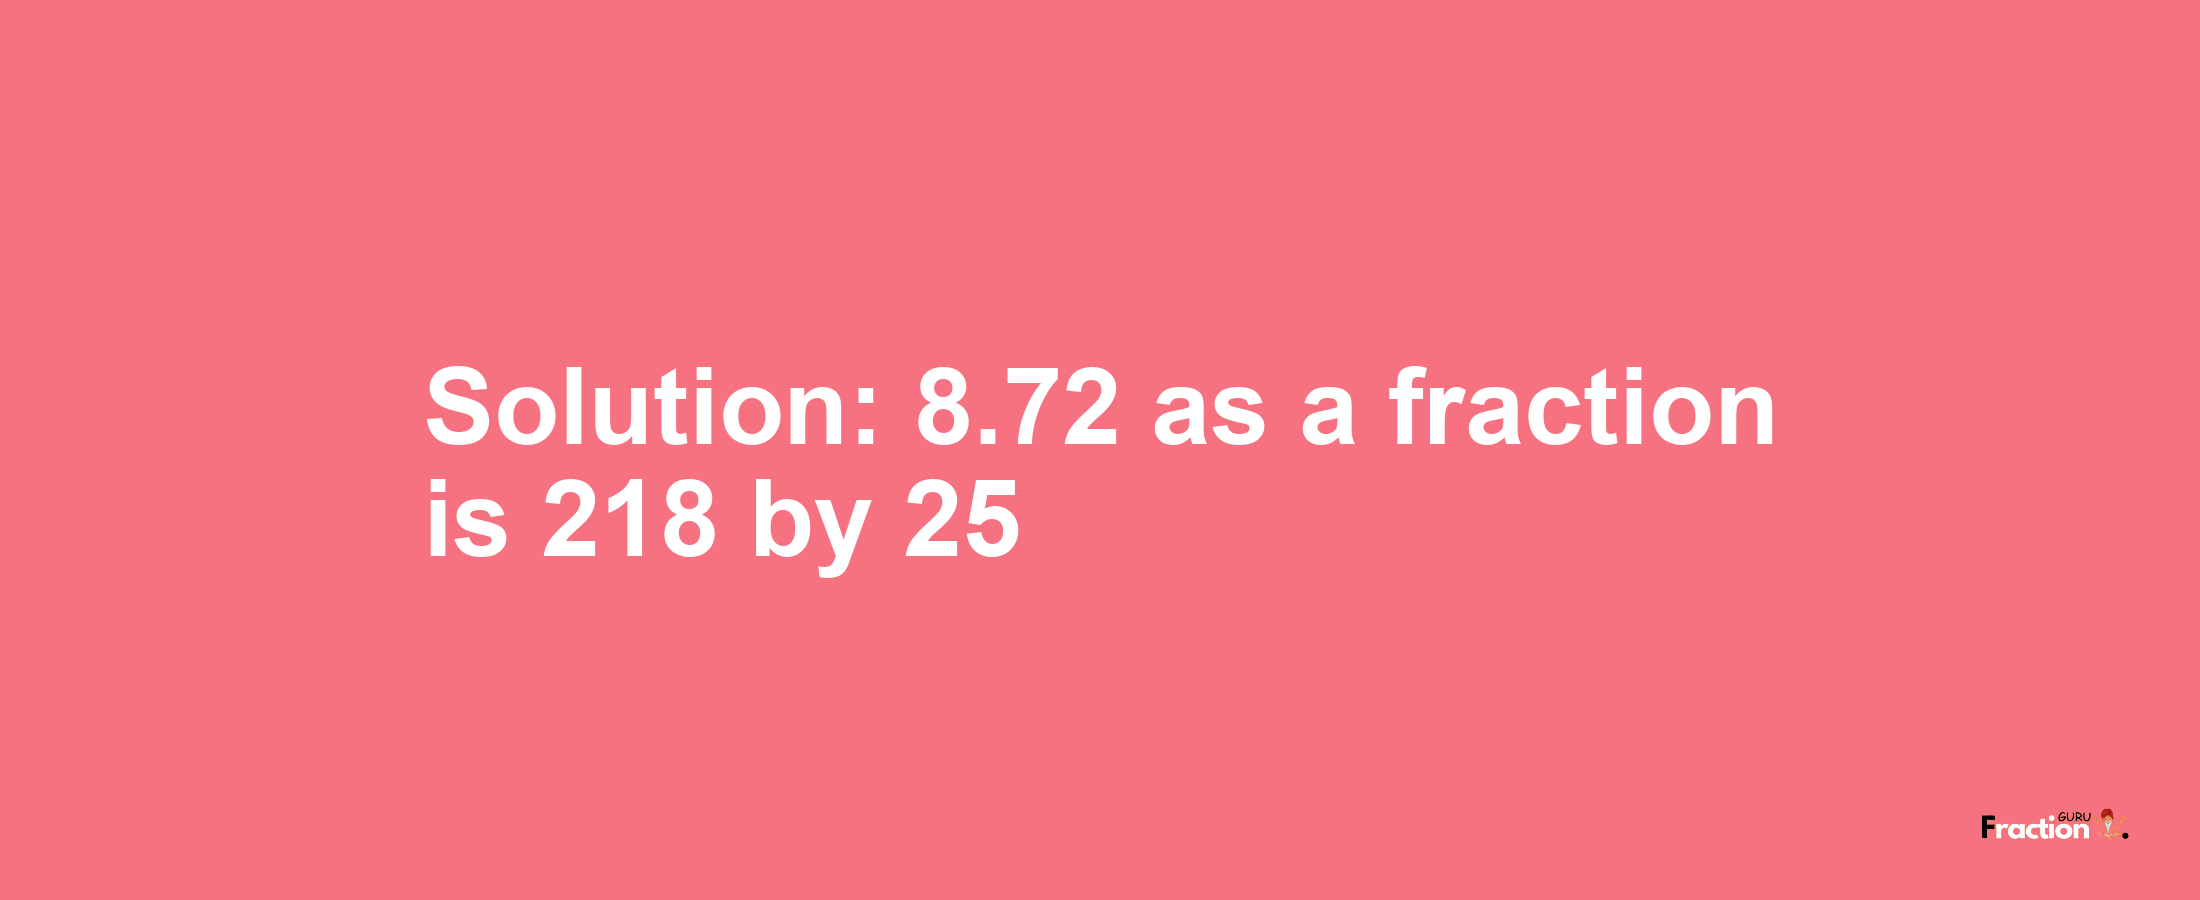 Solution:8.72 as a fraction is 218/25